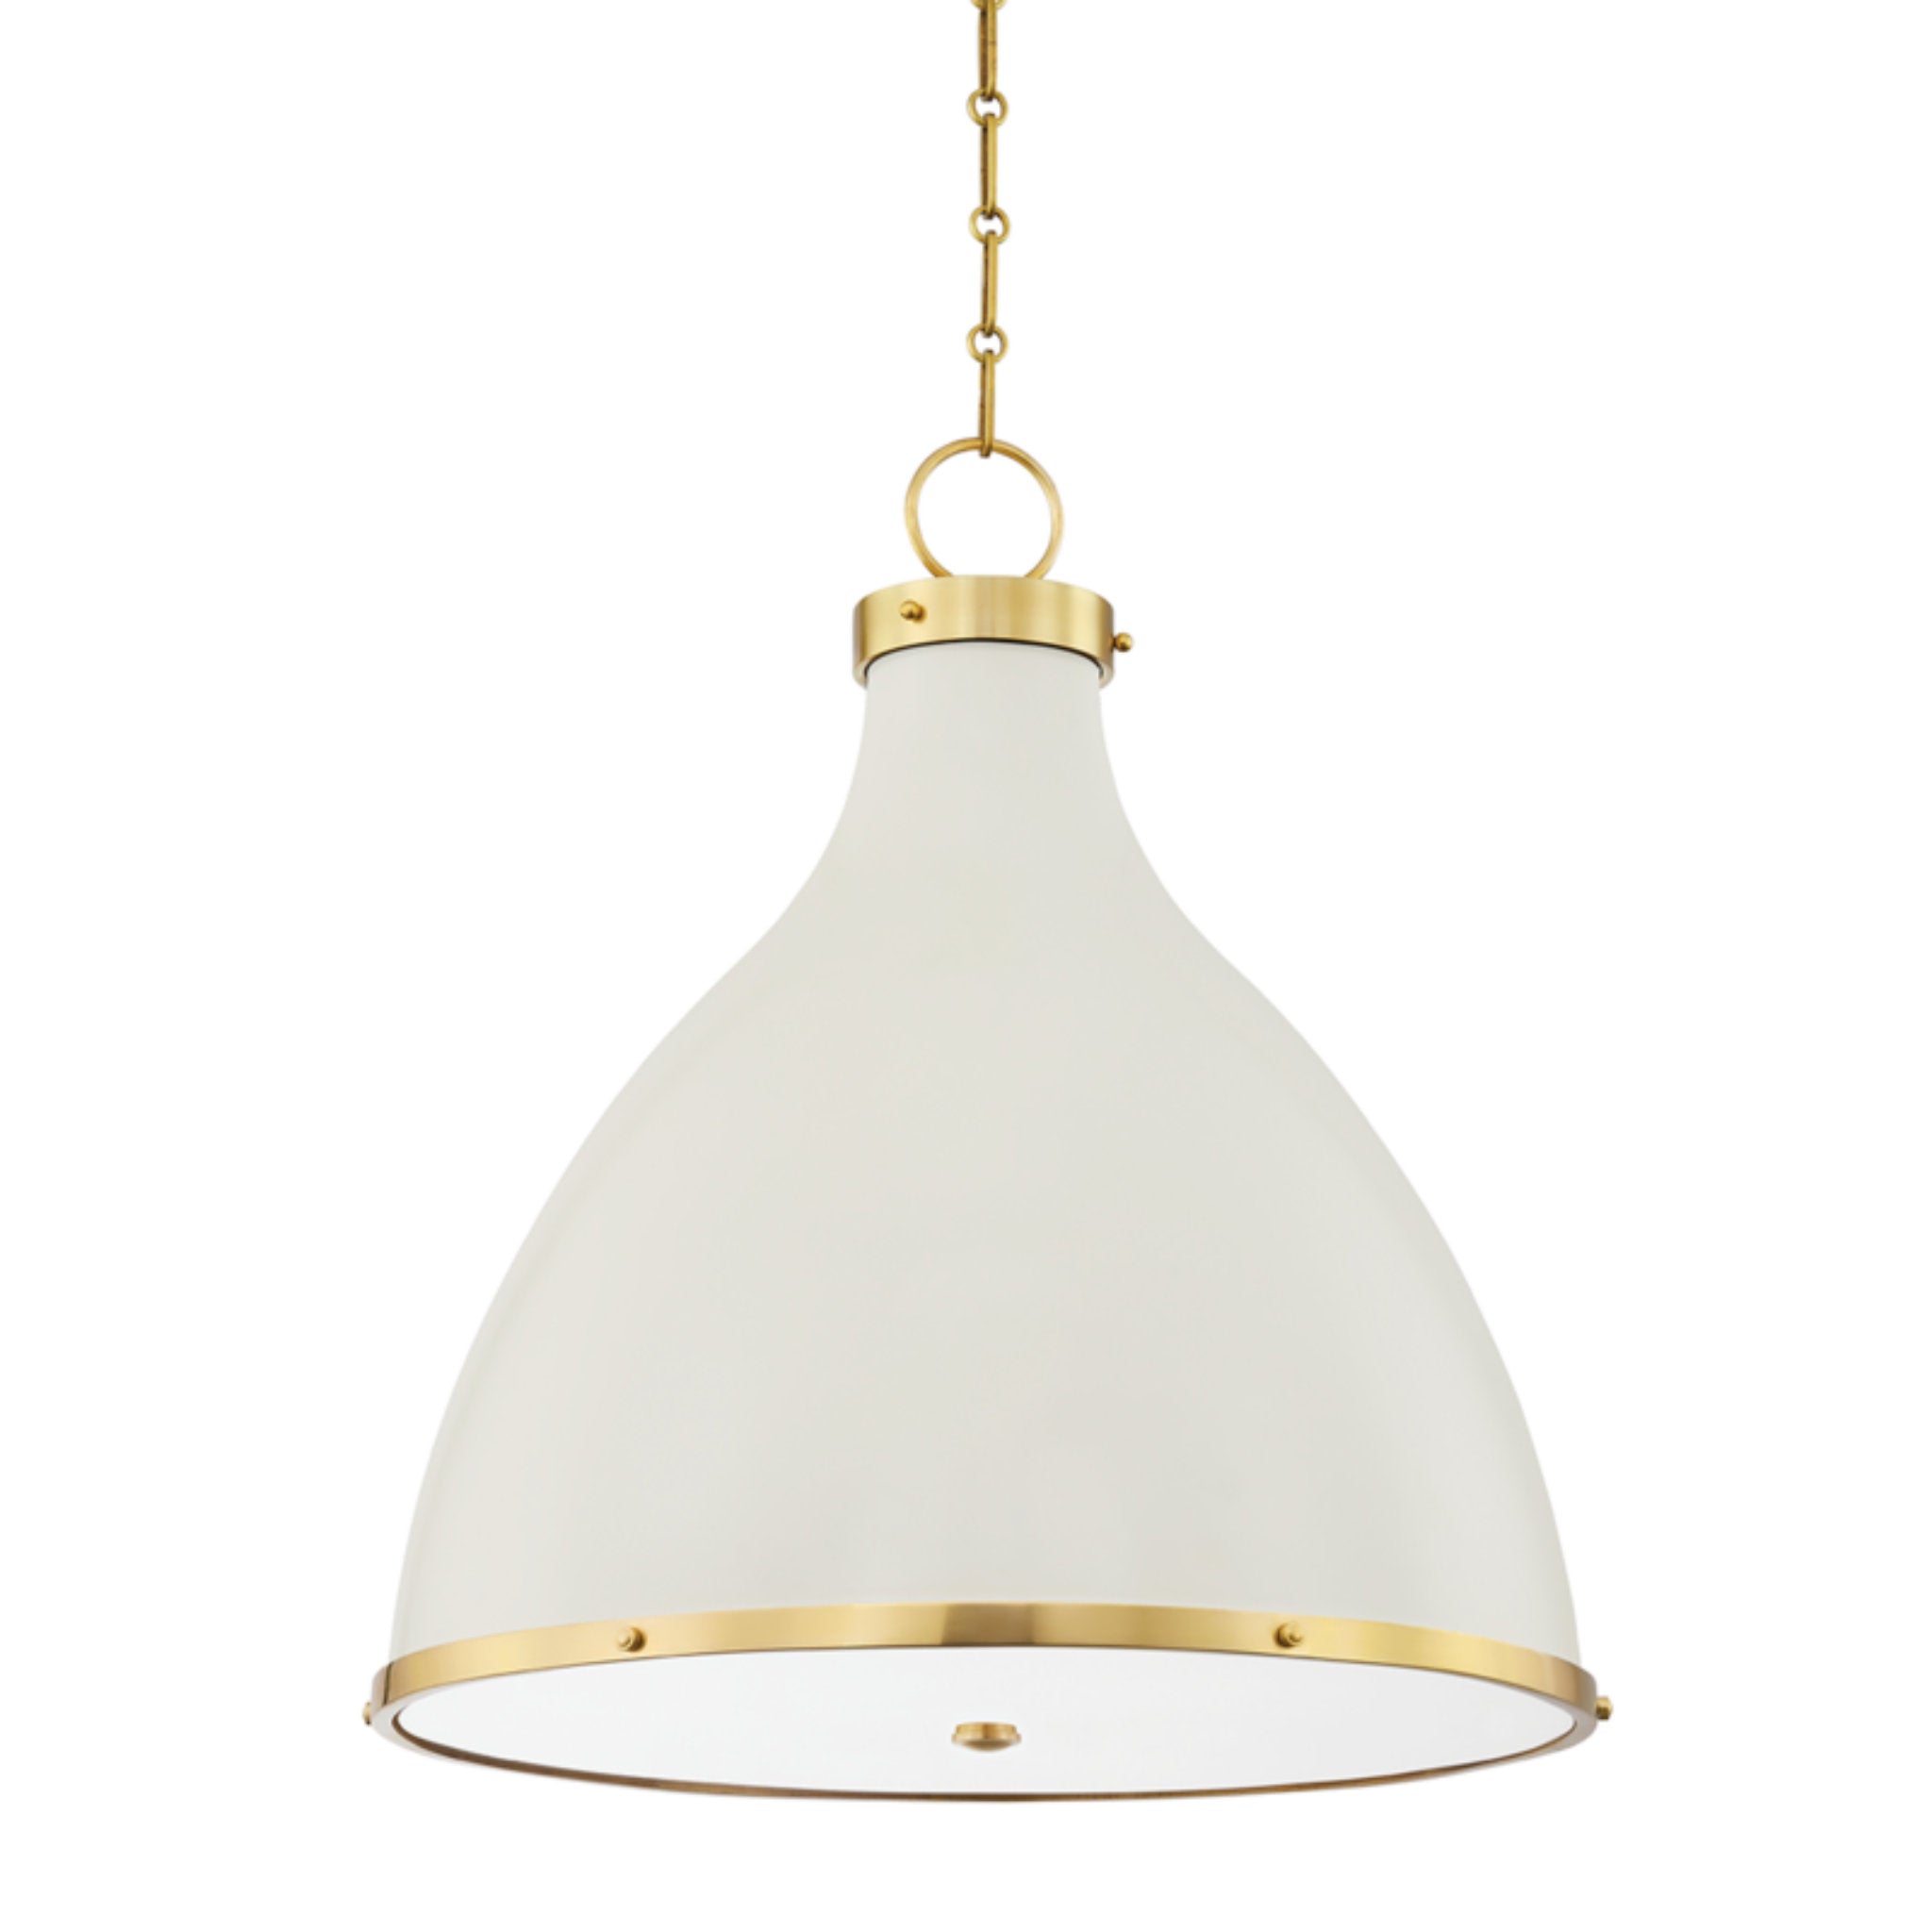 Painted No.1 3 Light Pendant in Aged Brass/off White by Mark D. Sikes